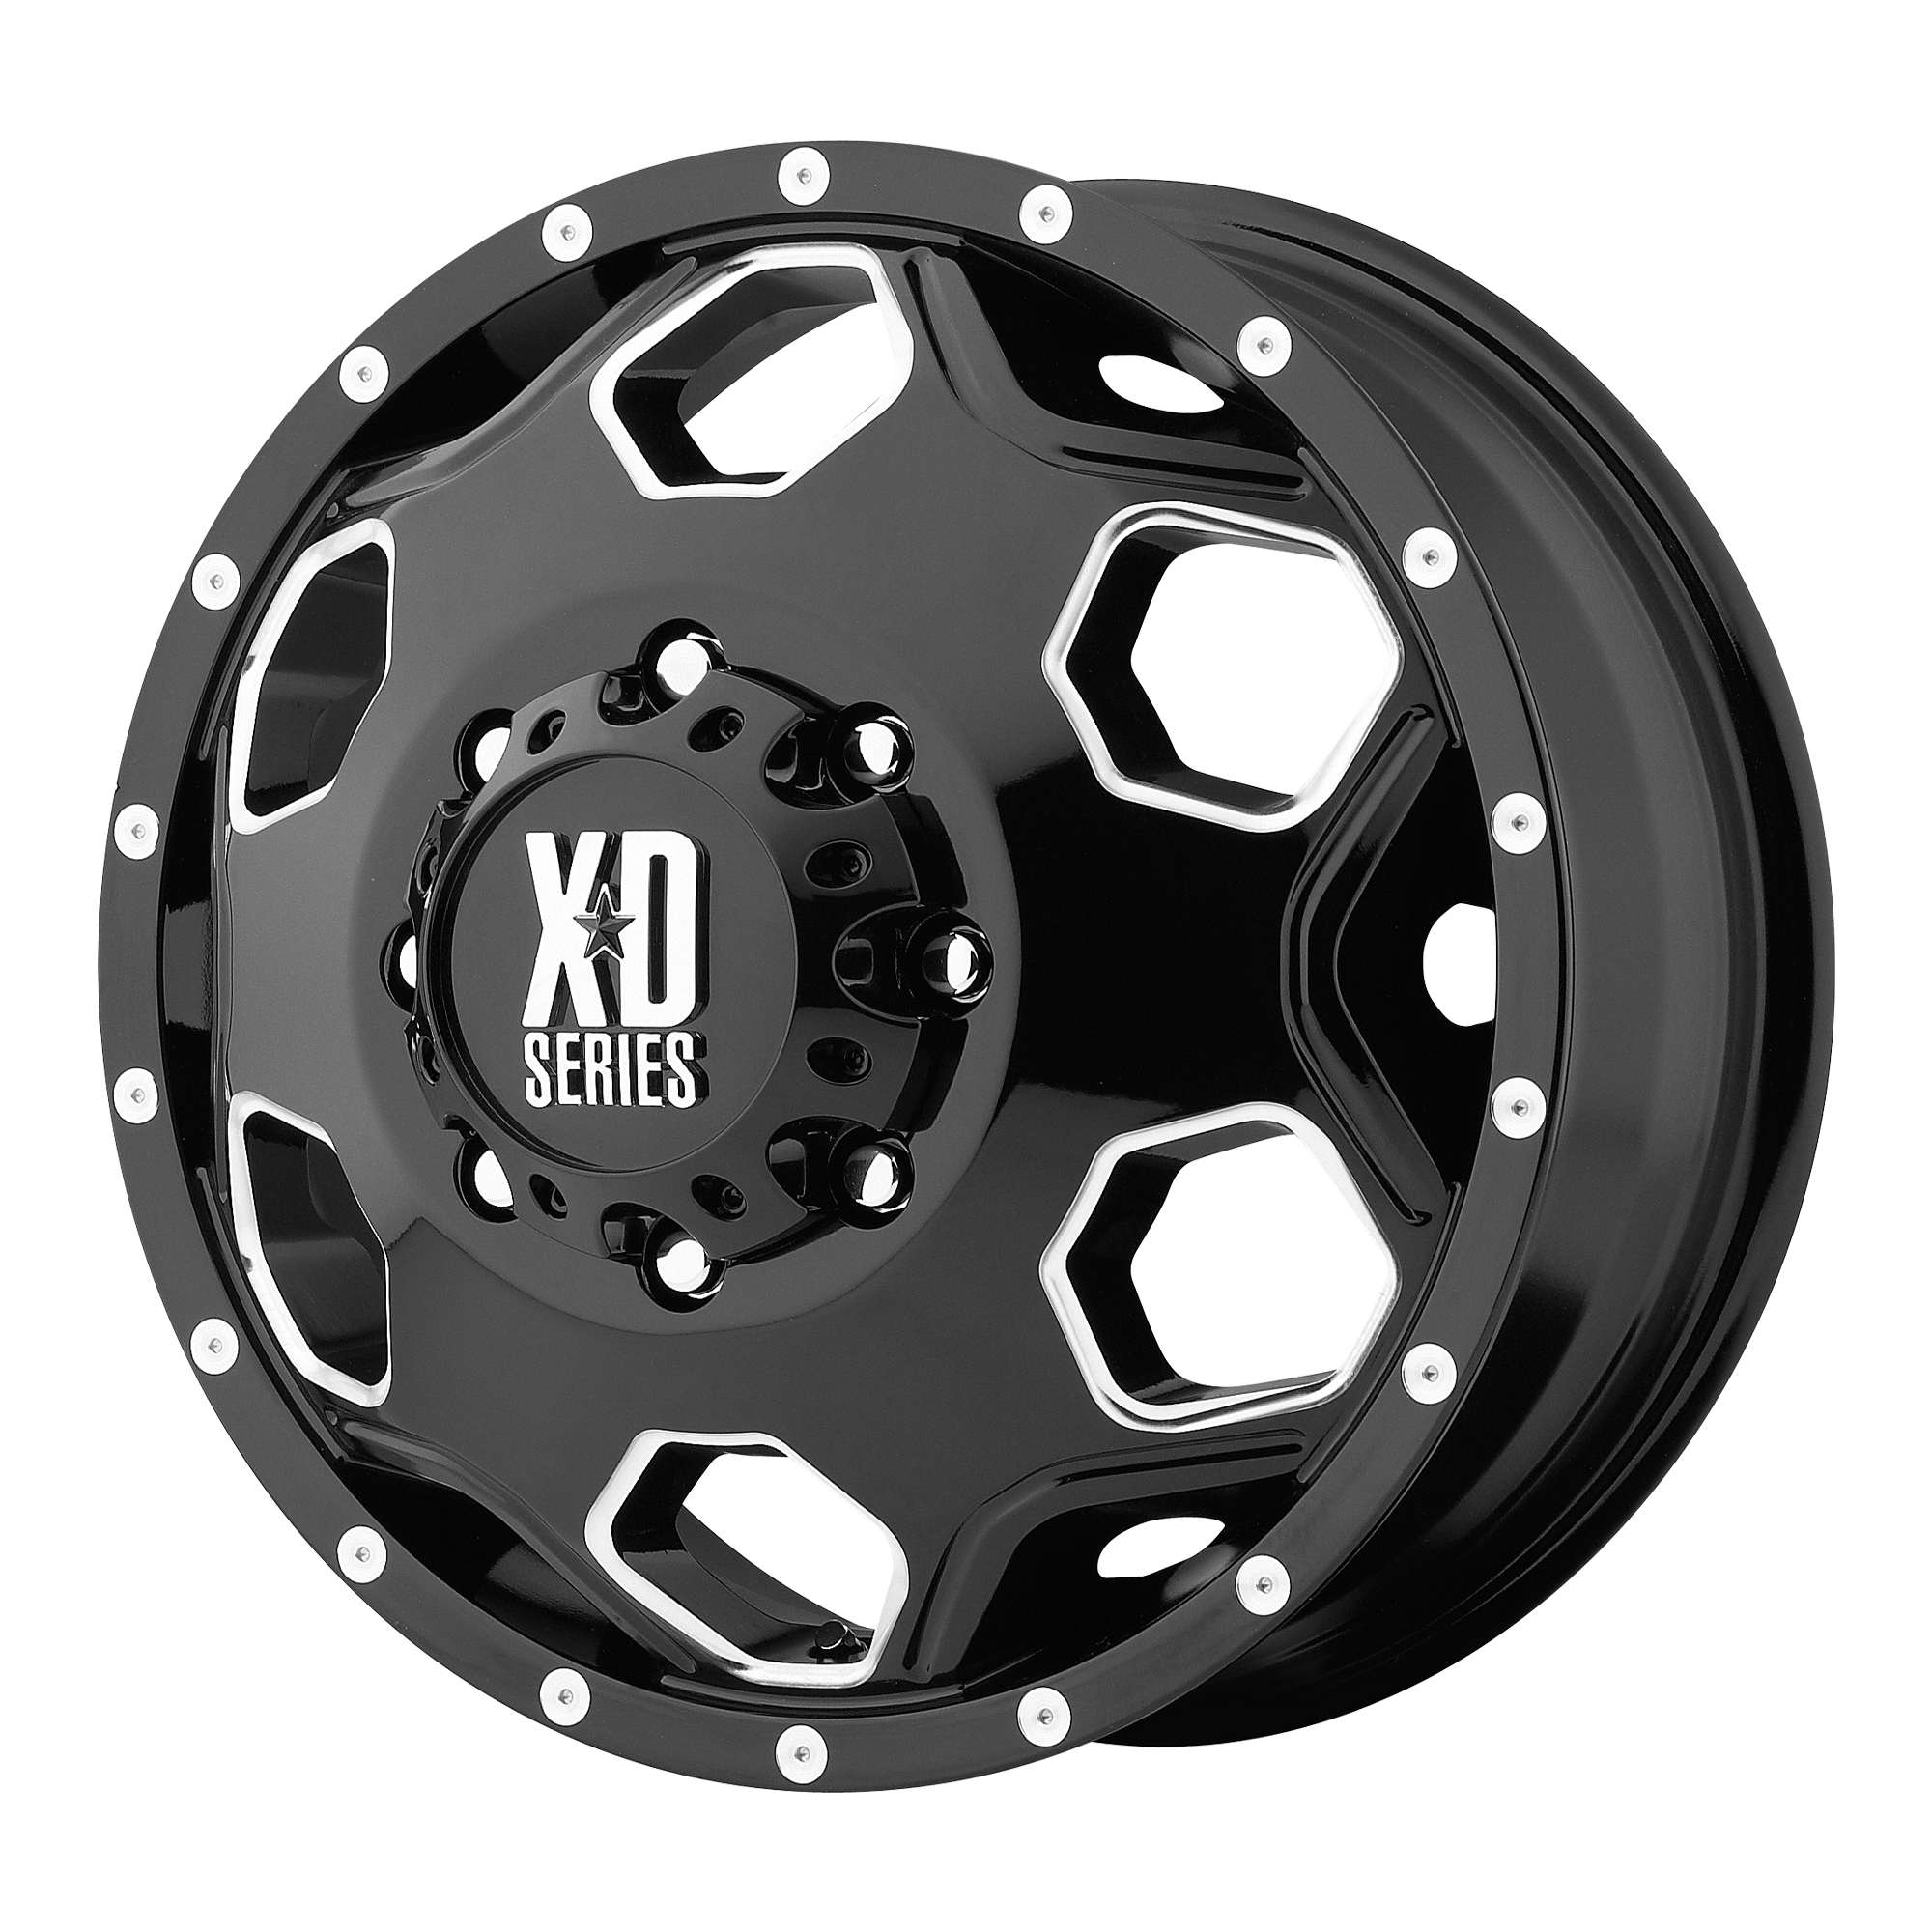 XD XD815 BATALLION GLOSS BLACK WITH MILLED ACCENTS WHEELS | 22X8.25 | 8X165.1 | OFFSET: -200MM | CB: 121.5MM